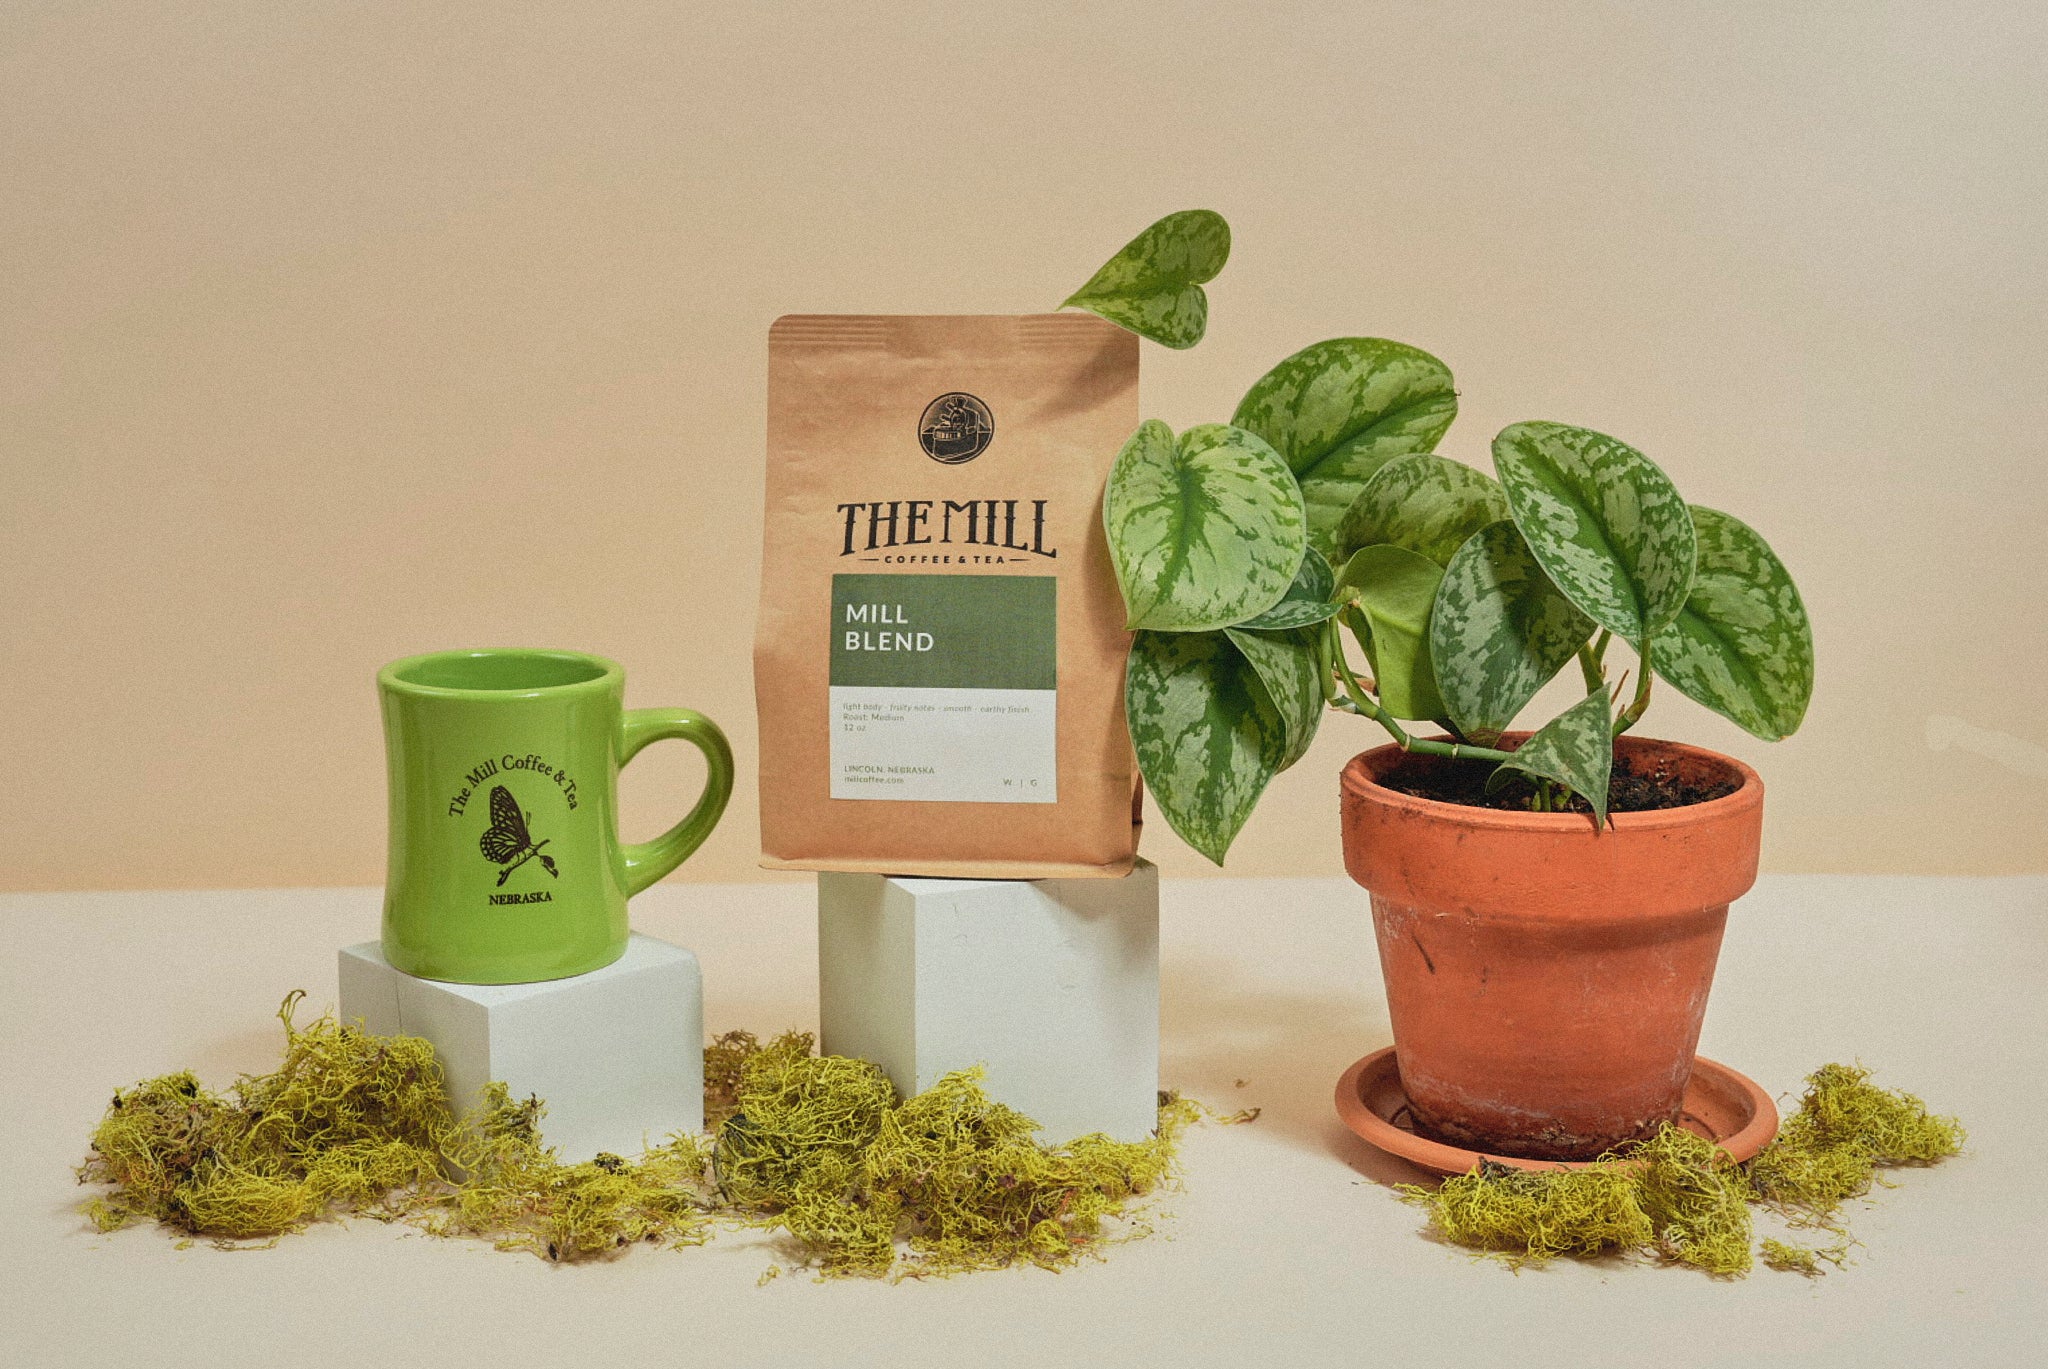 header image of mill cup, bag of coffee, and plant